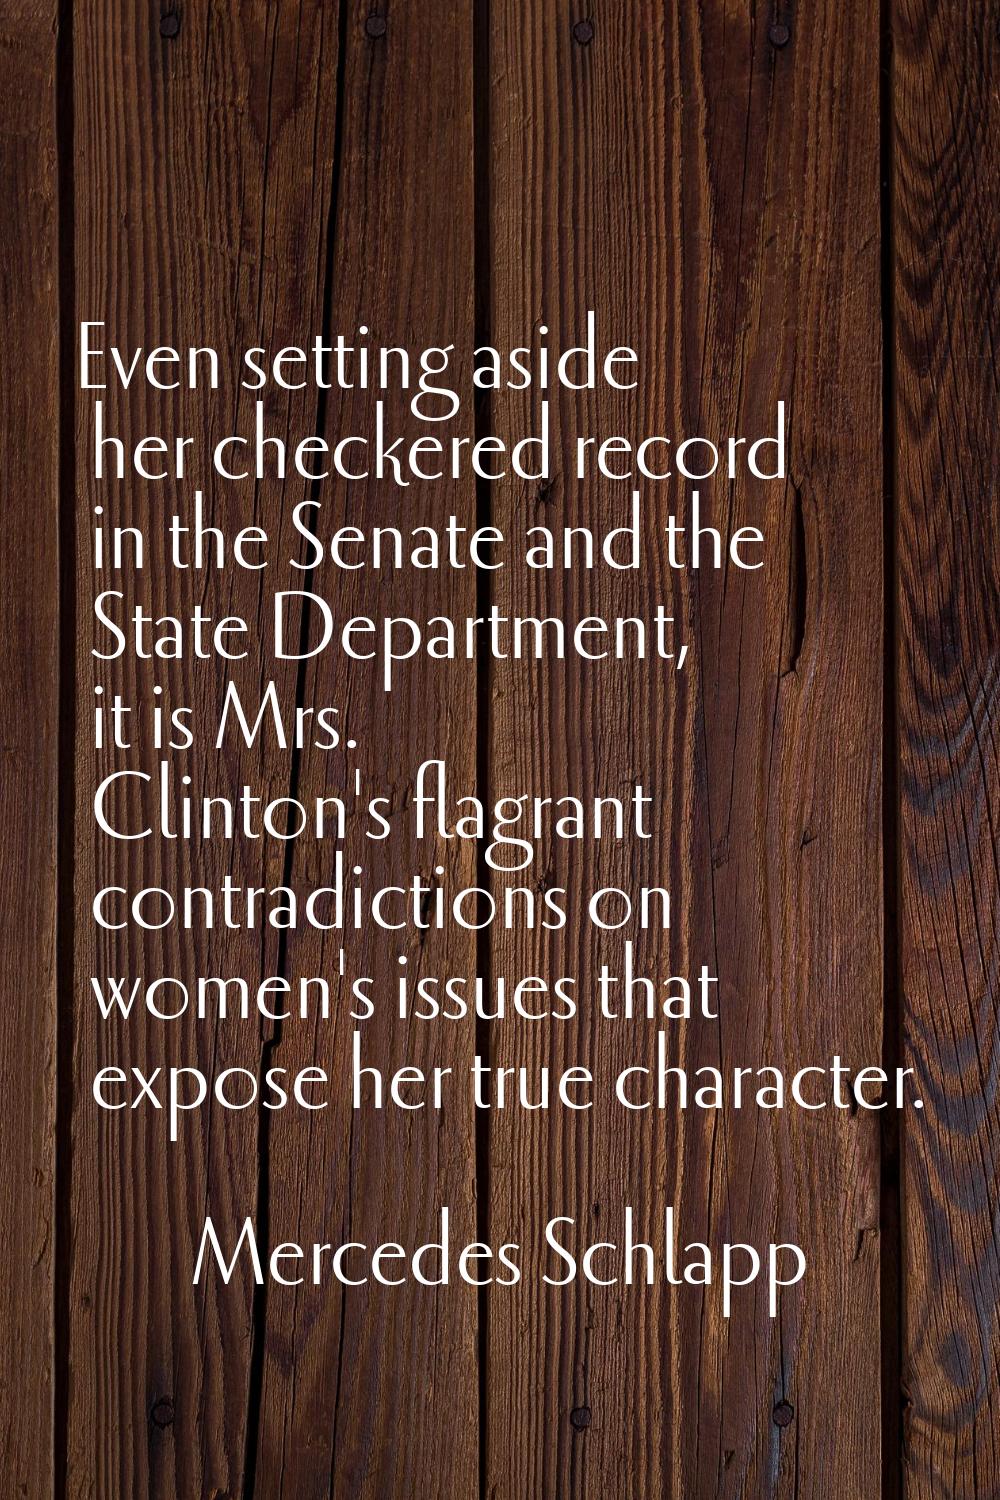 Even setting aside her checkered record in the Senate and the State Department, it is Mrs. Clinton'